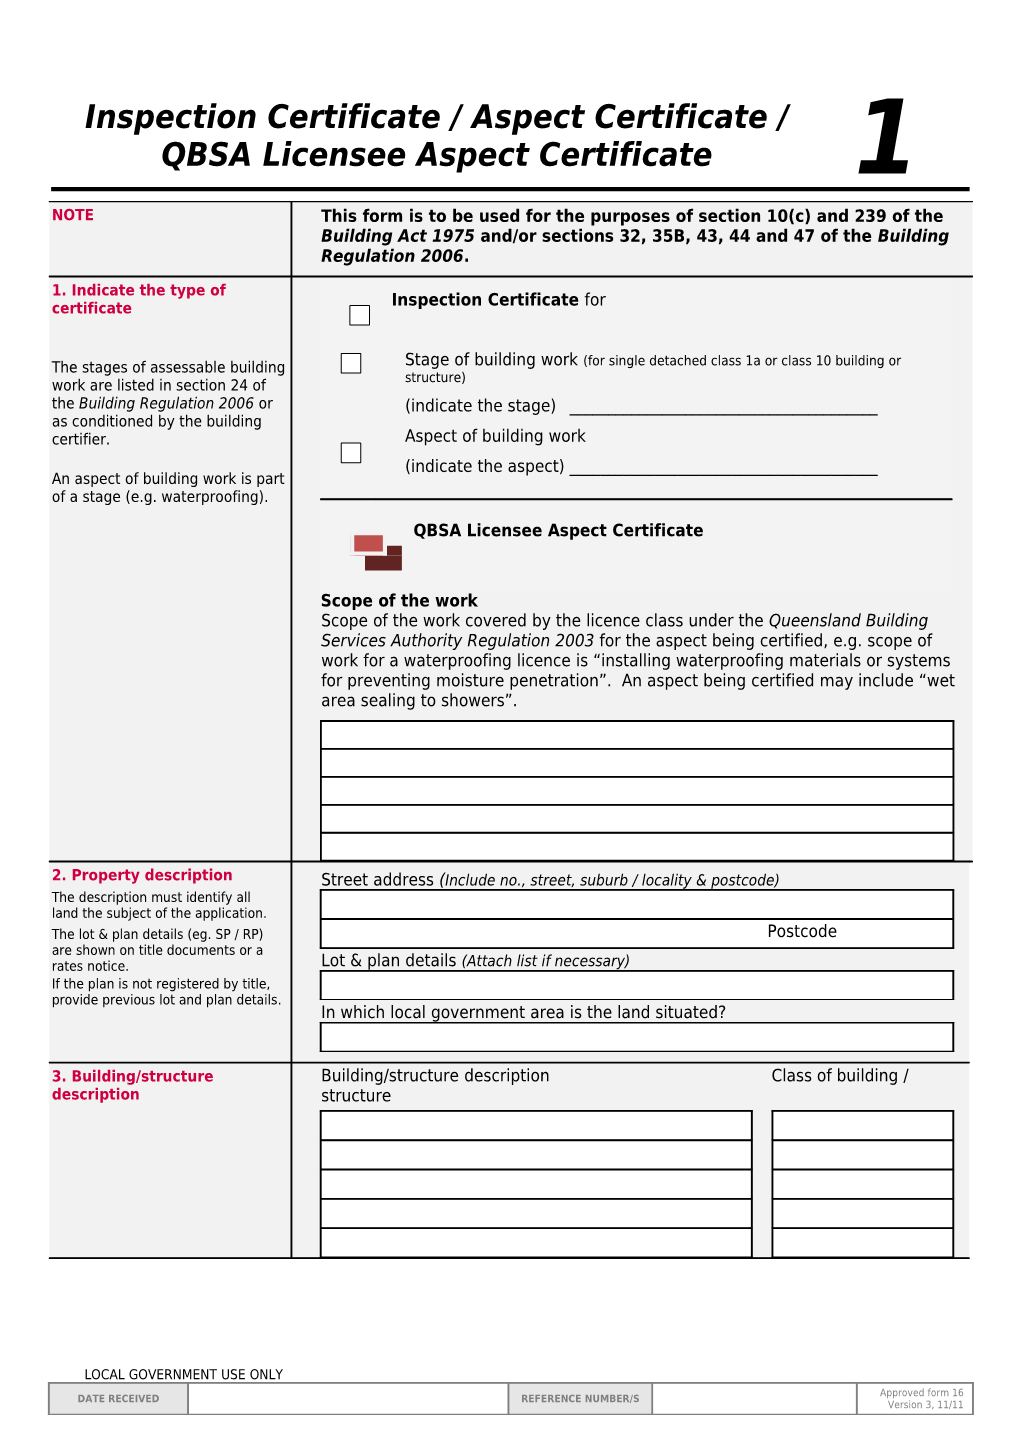 Form 16 - Inspection Certificate / Aspect Certificate / QBSA Licensee Aspect Certificate